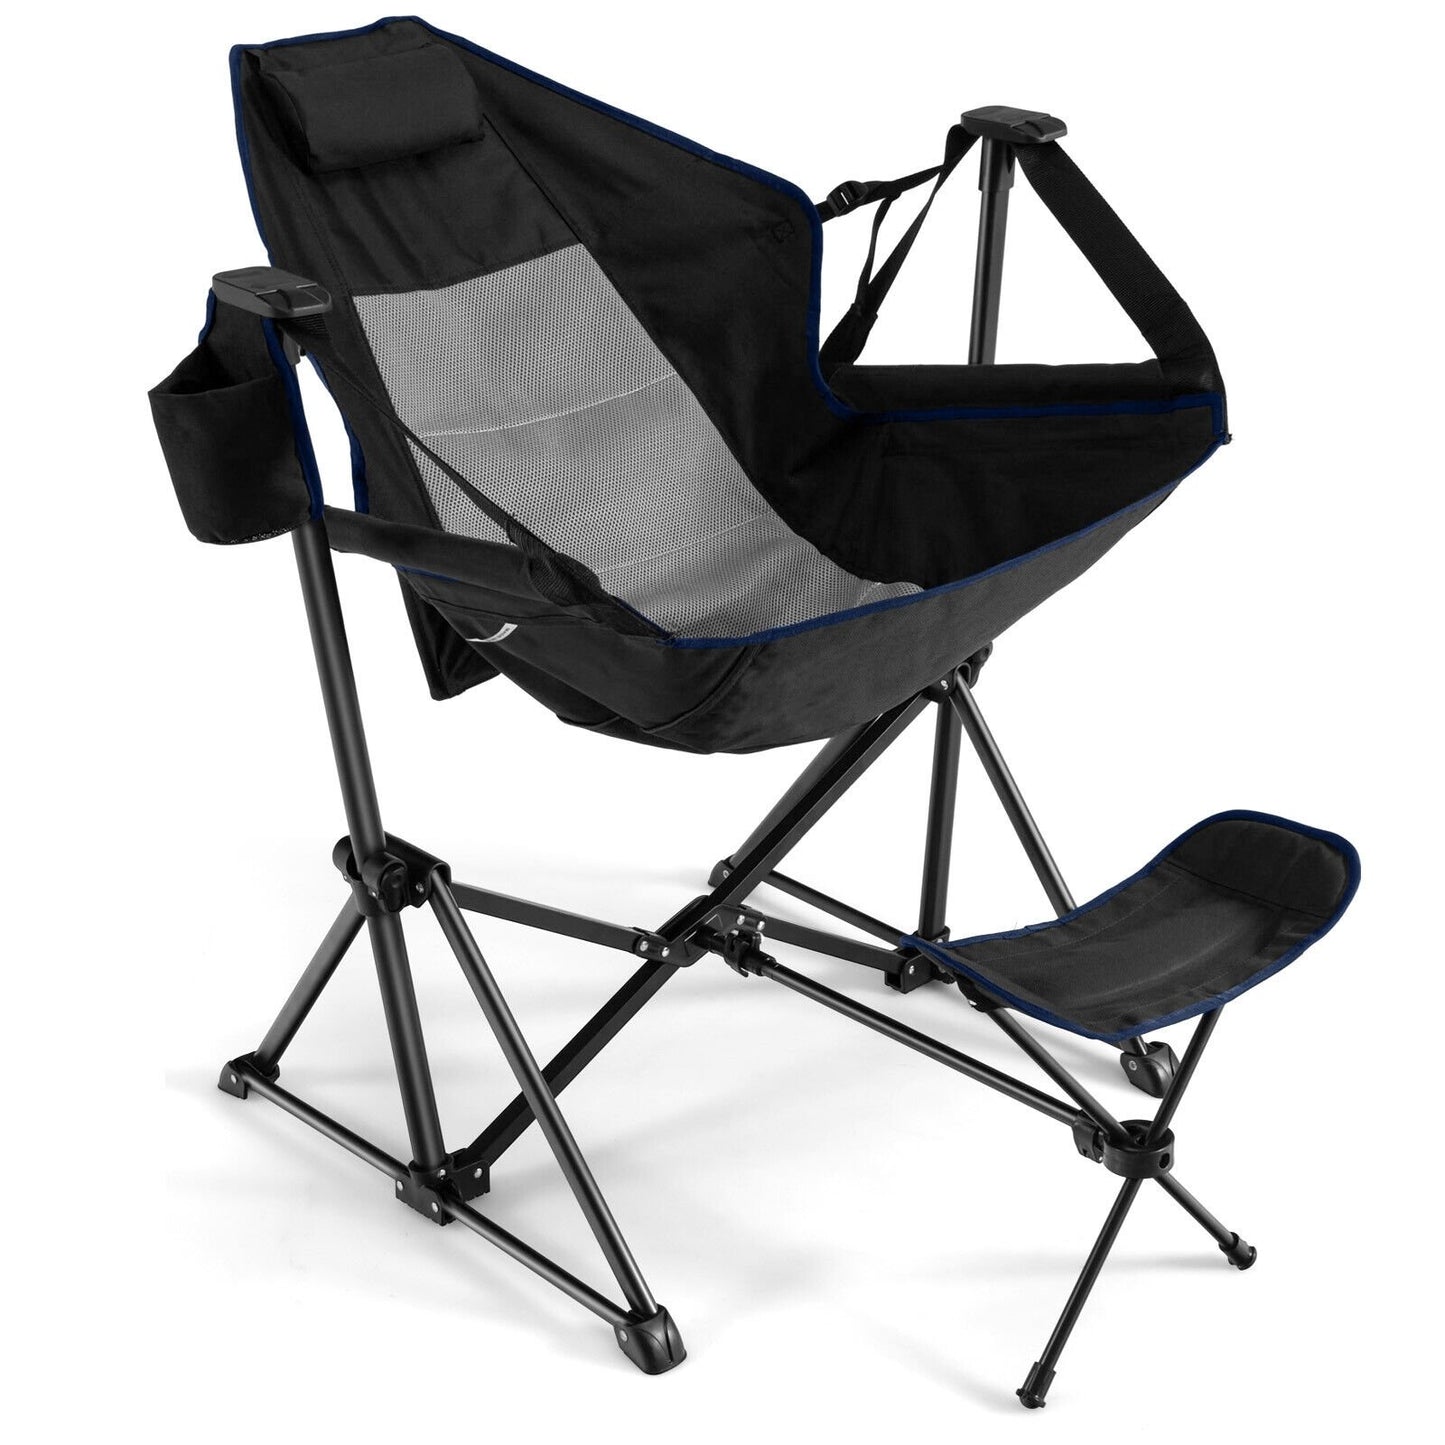 Hammock Camping Chair with Retractable Footrest and Carrying Bag, Black